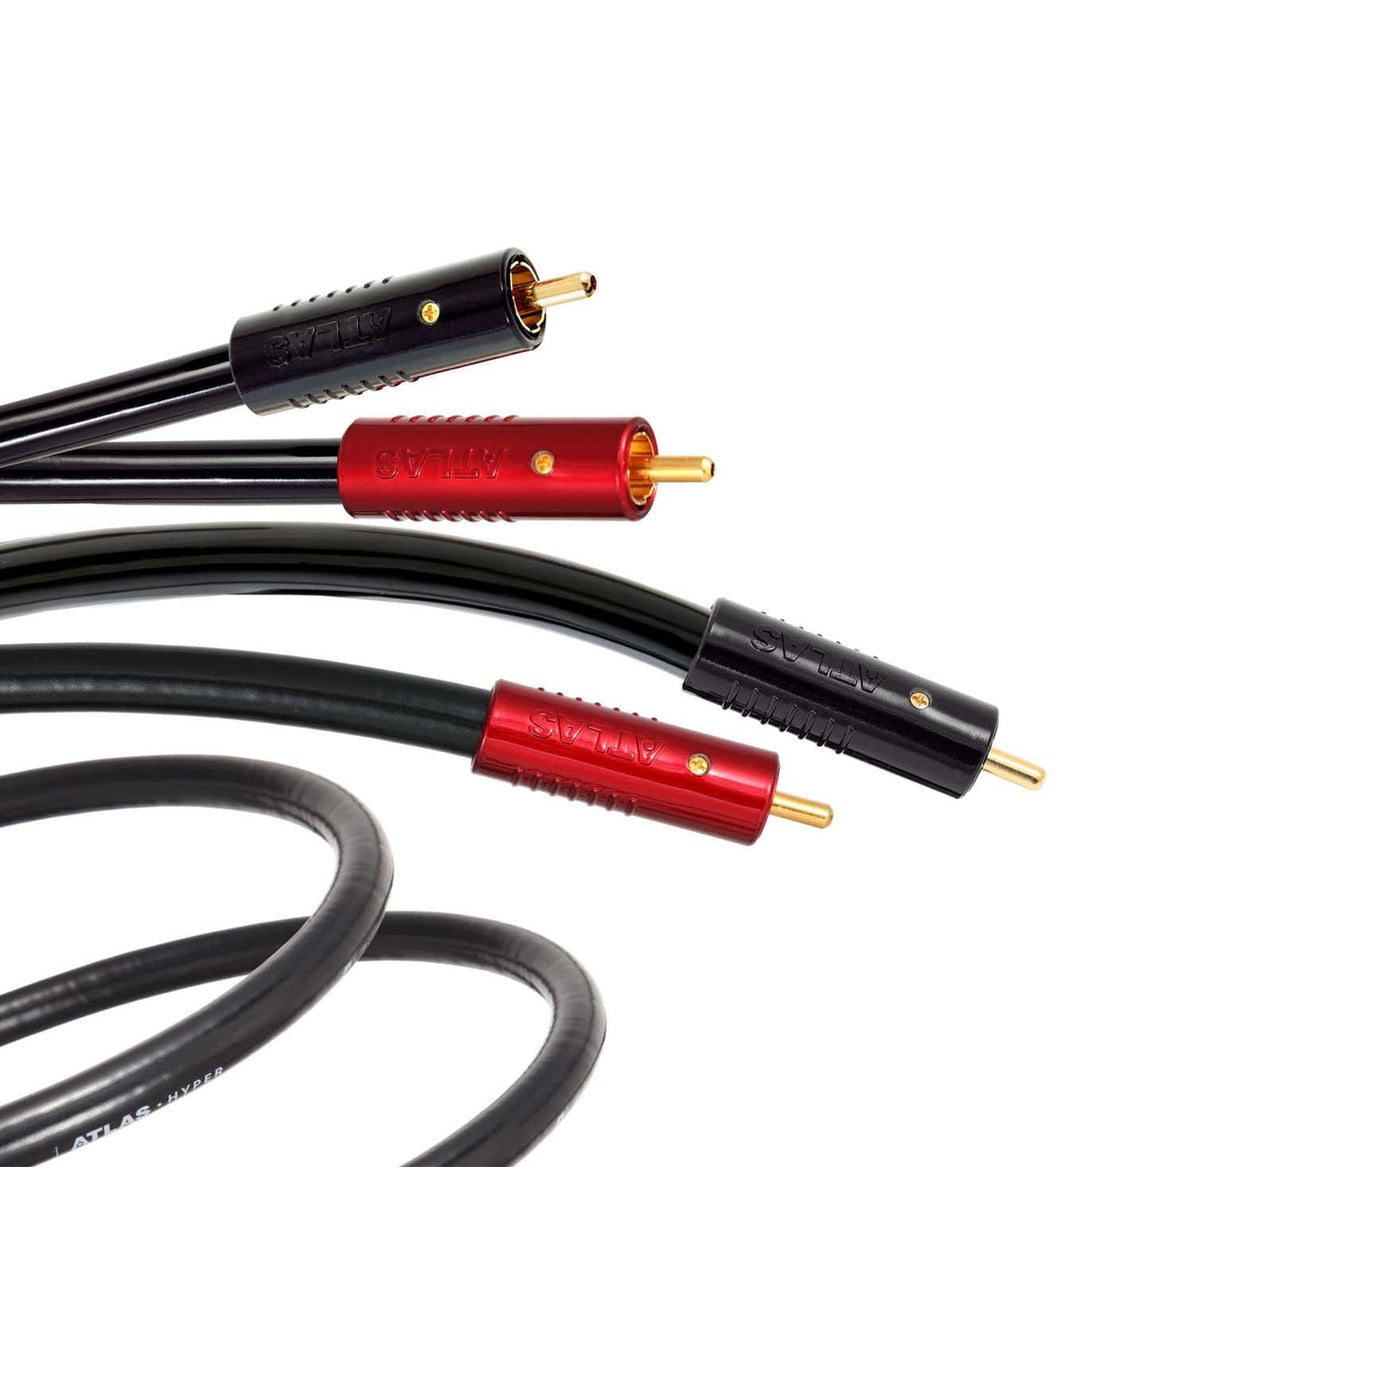 Atlas Hyper Achromatic RCA Interconnect Cable at Audio Influence